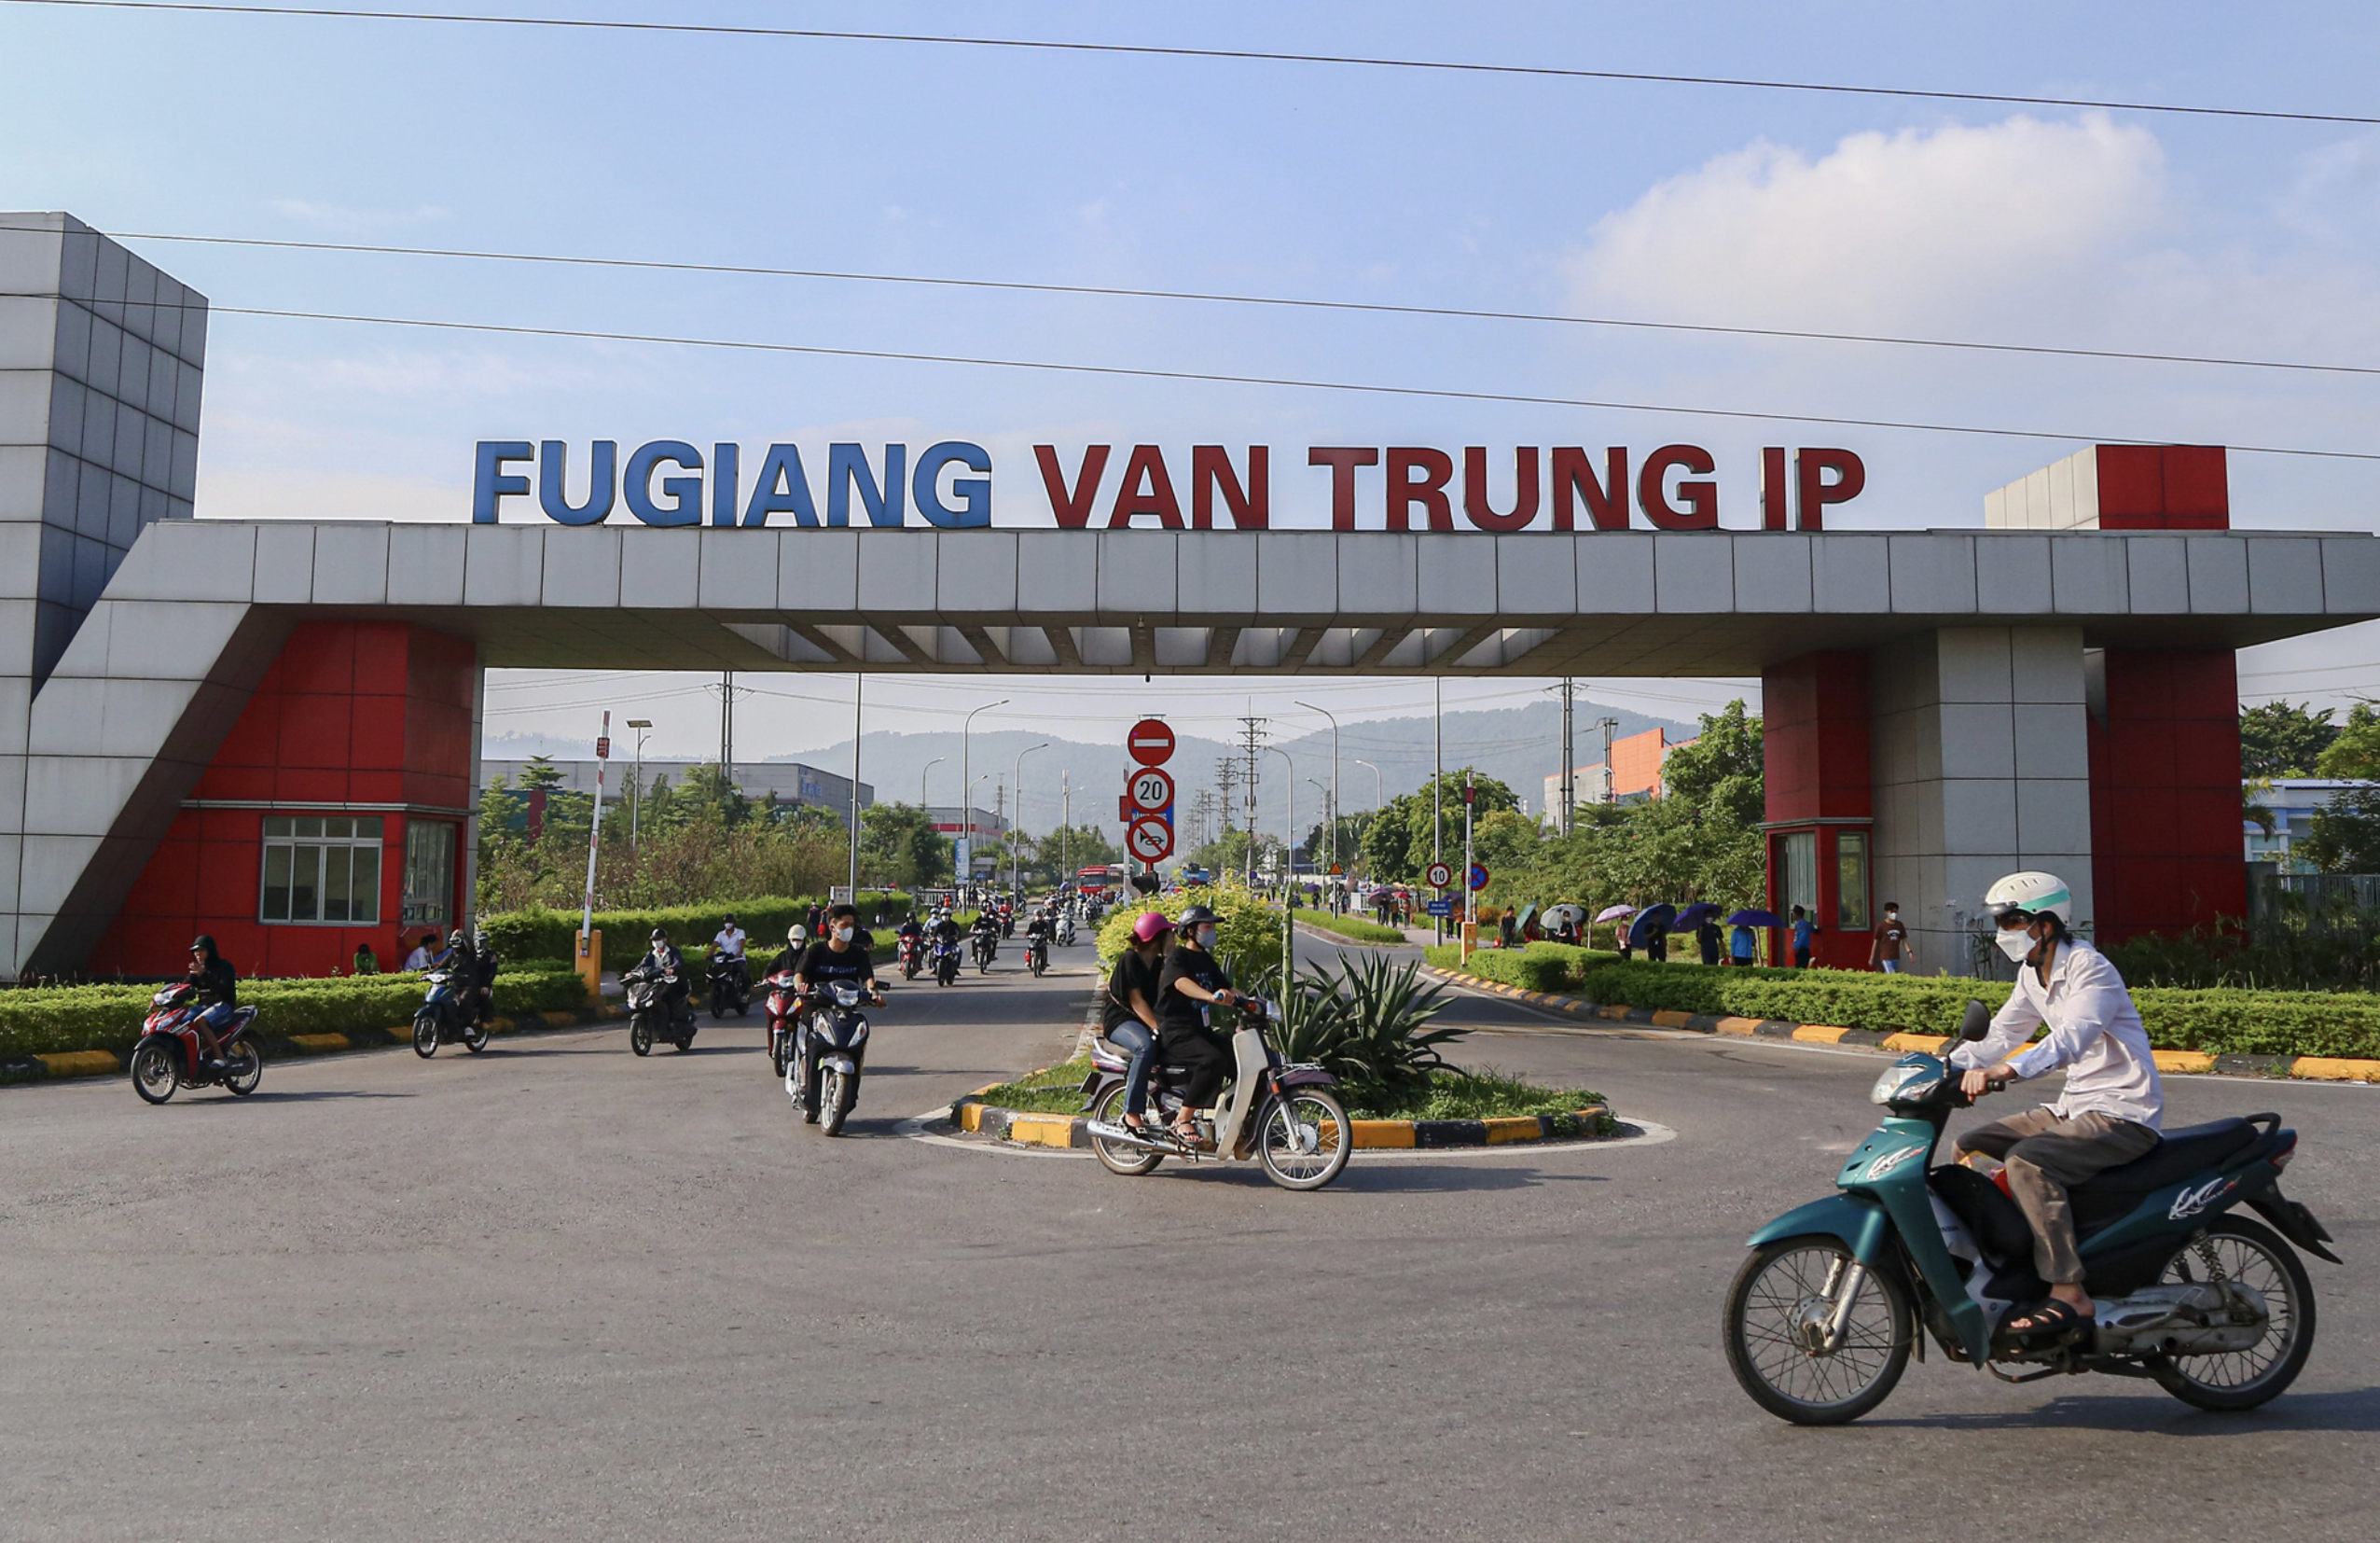 The entrance of Van Trung Industrial Park in Bac Giang Province, northern Vietnam. Photo: Ha Quan / Tuoi Tre